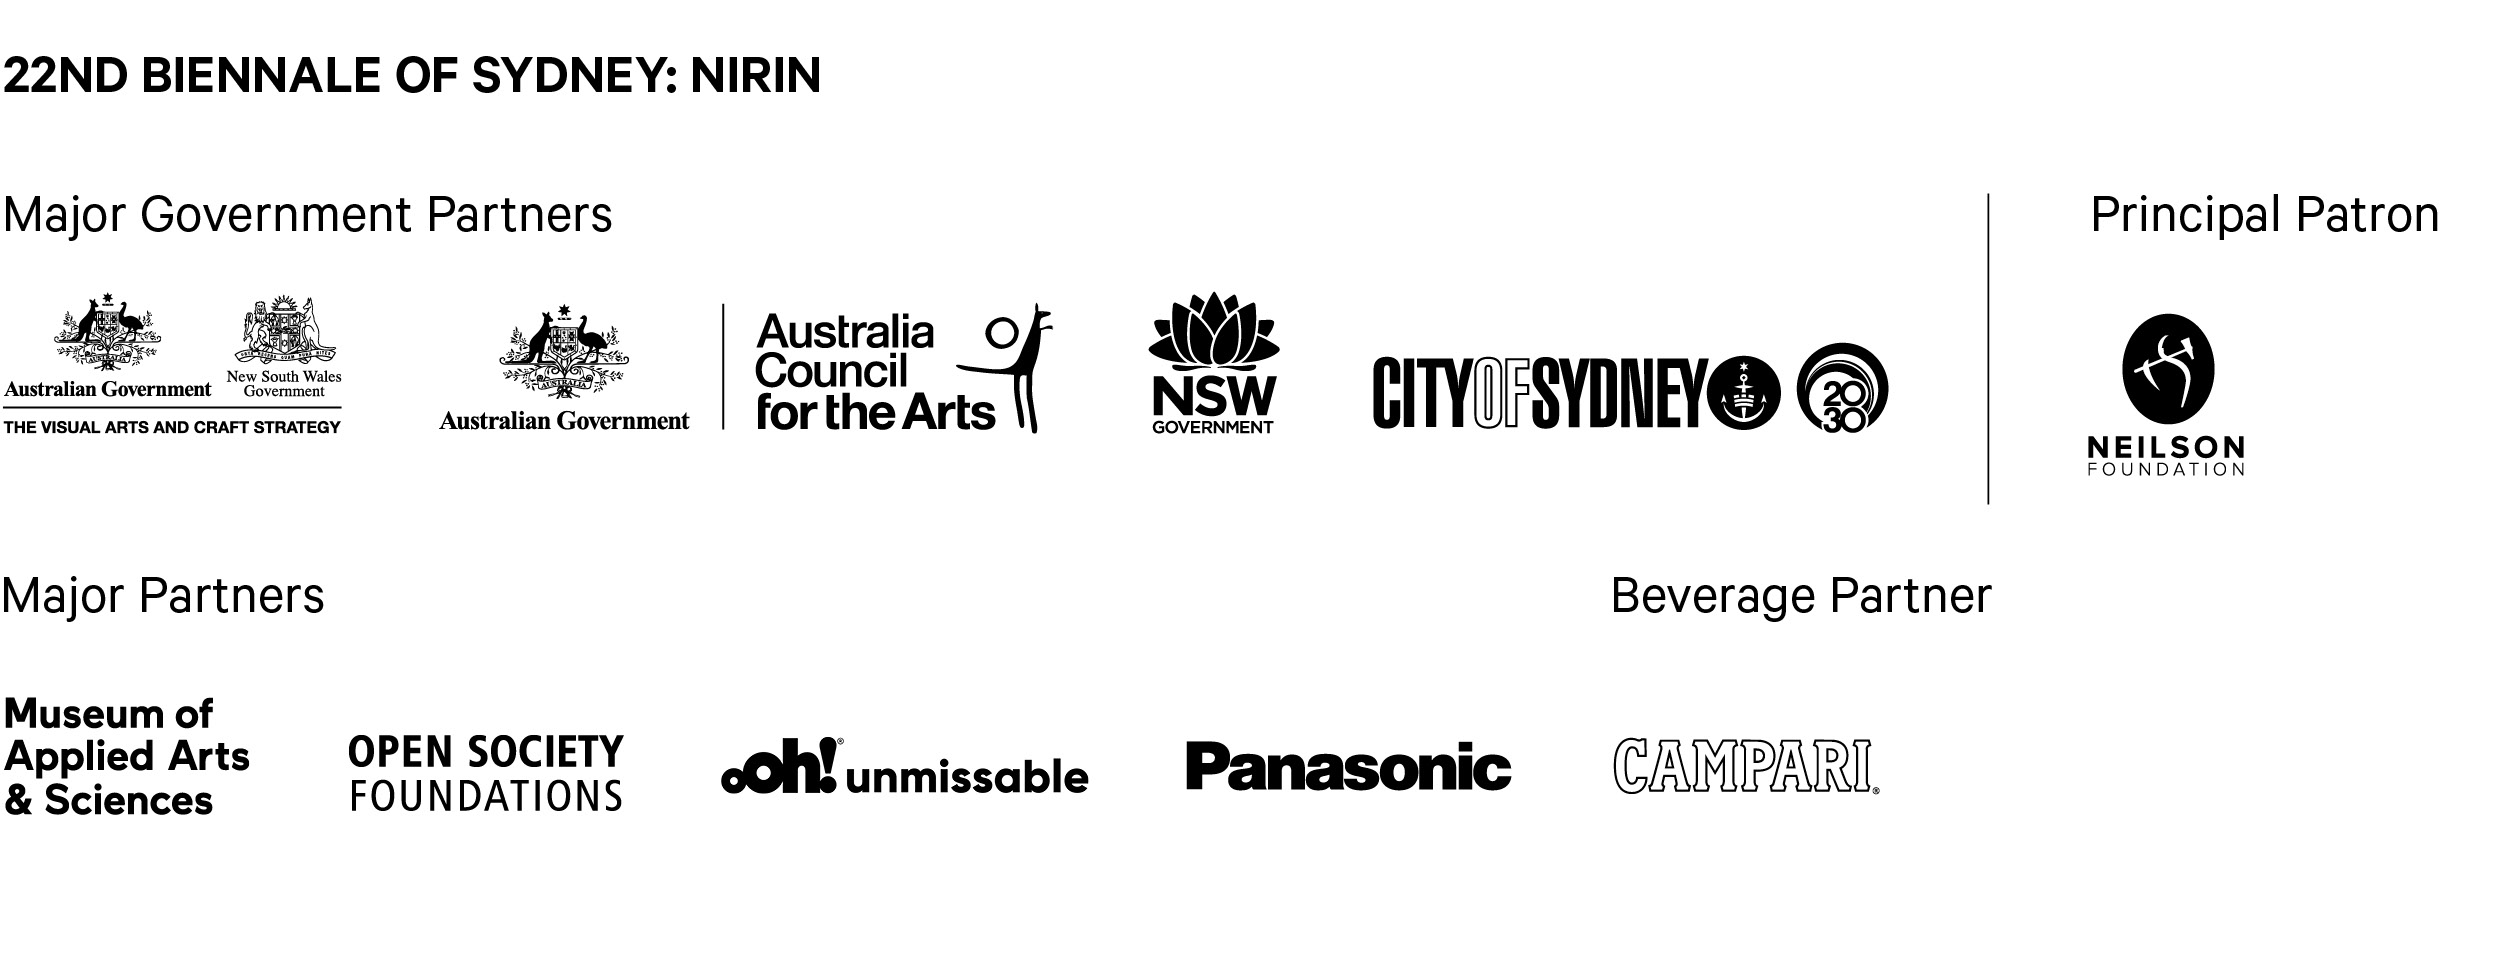 The Museum of Contemporary Art is proudly supported by Major Government Partners, Australian Government, New South Wales Government, The Visual Arts and Craft Strategy, Australia Council for the Arts, City of Sydney; Principal Patron Neilson Foundation; Major Partners, Museum of Applied Arts & Sciences, Open Society Foundations, oOh unmissable, Panasonic; Campari beverage partner